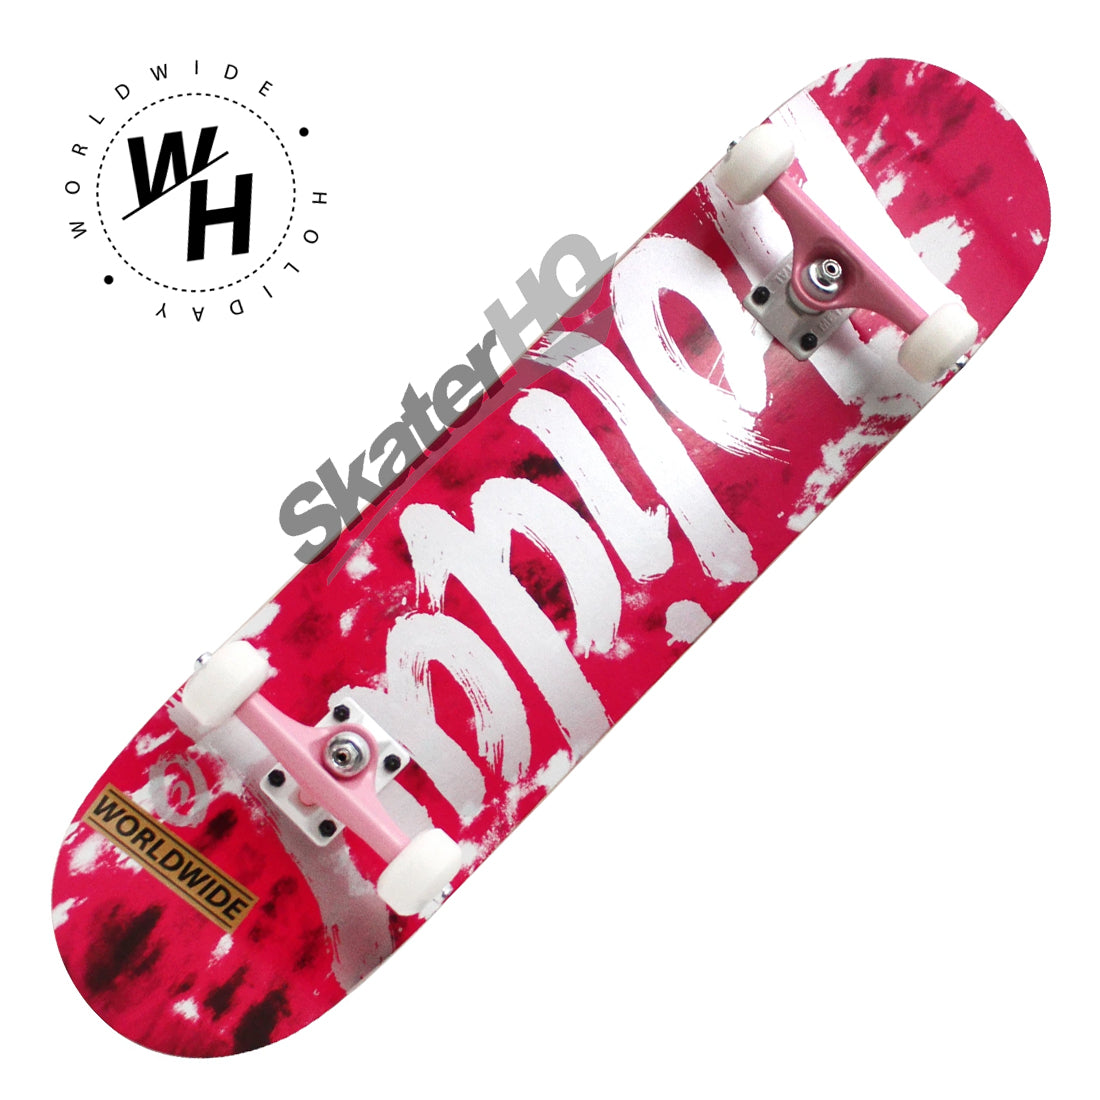 Holiday Tie Dye 7.25 Mini Complete - Pink/Silver Skateboard Completes Modern Street